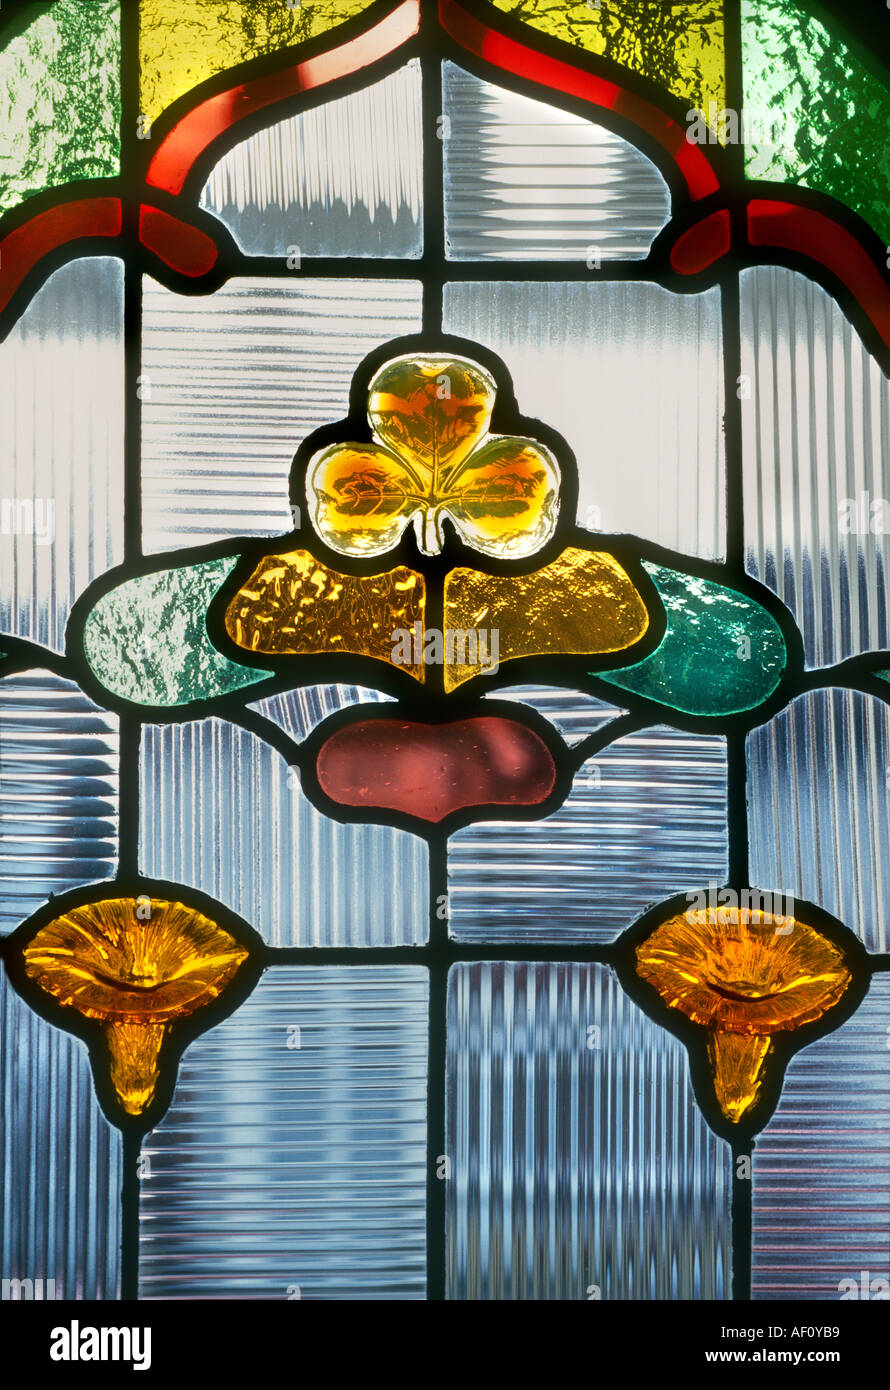 Close up front door panel of Decorative Stained Glass in the Art Nouveau style British Housing London Stock Photo